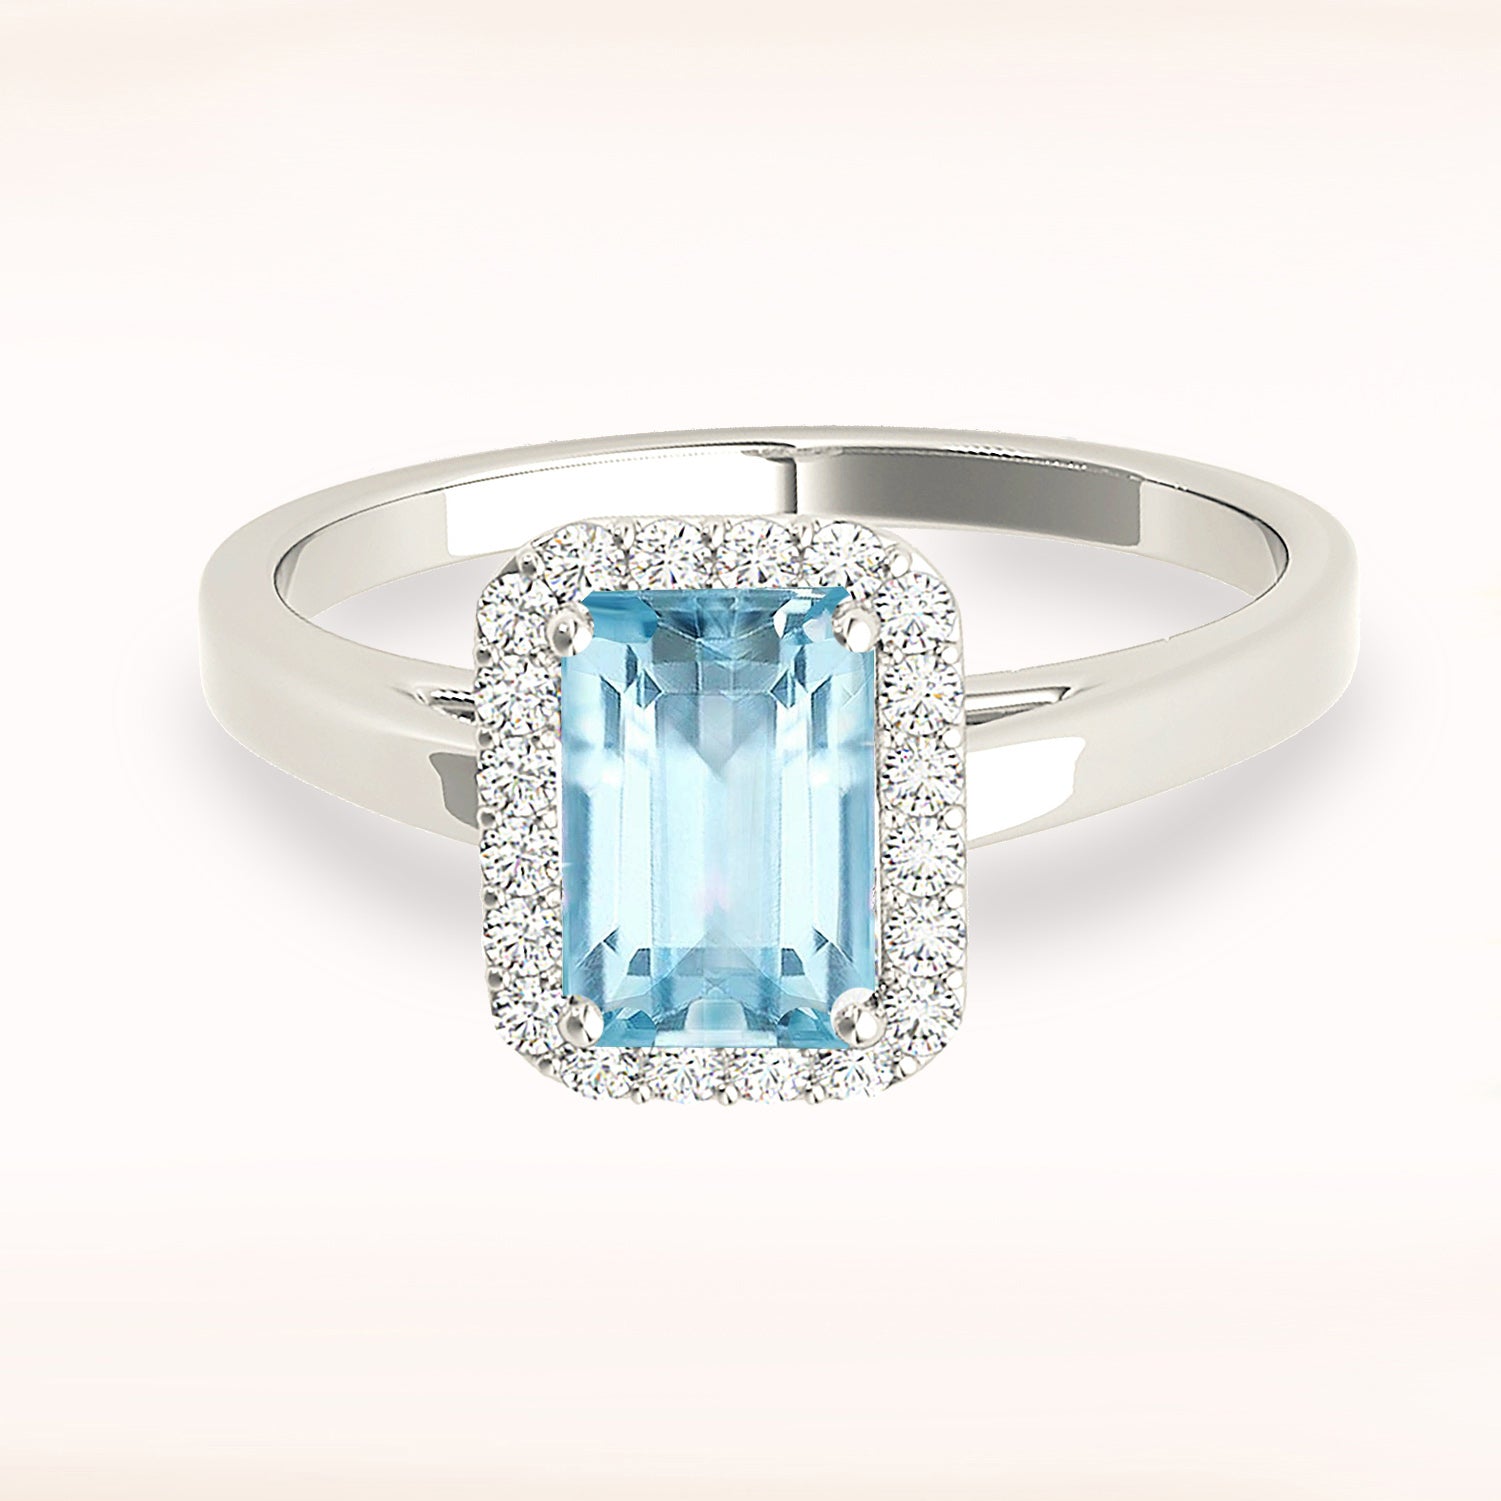 1.00 ct. Genuine Emerald Cut Aquamarine Ring With 0.20 ctw. Diamond Halo And Solid Gold Band | Emerald Cut Blue Aquamarine Halo Ring-in 14K/18K White, Yellow, Rose Gold and Platinum - Christmas Jewelry Gift -VIRABYANI